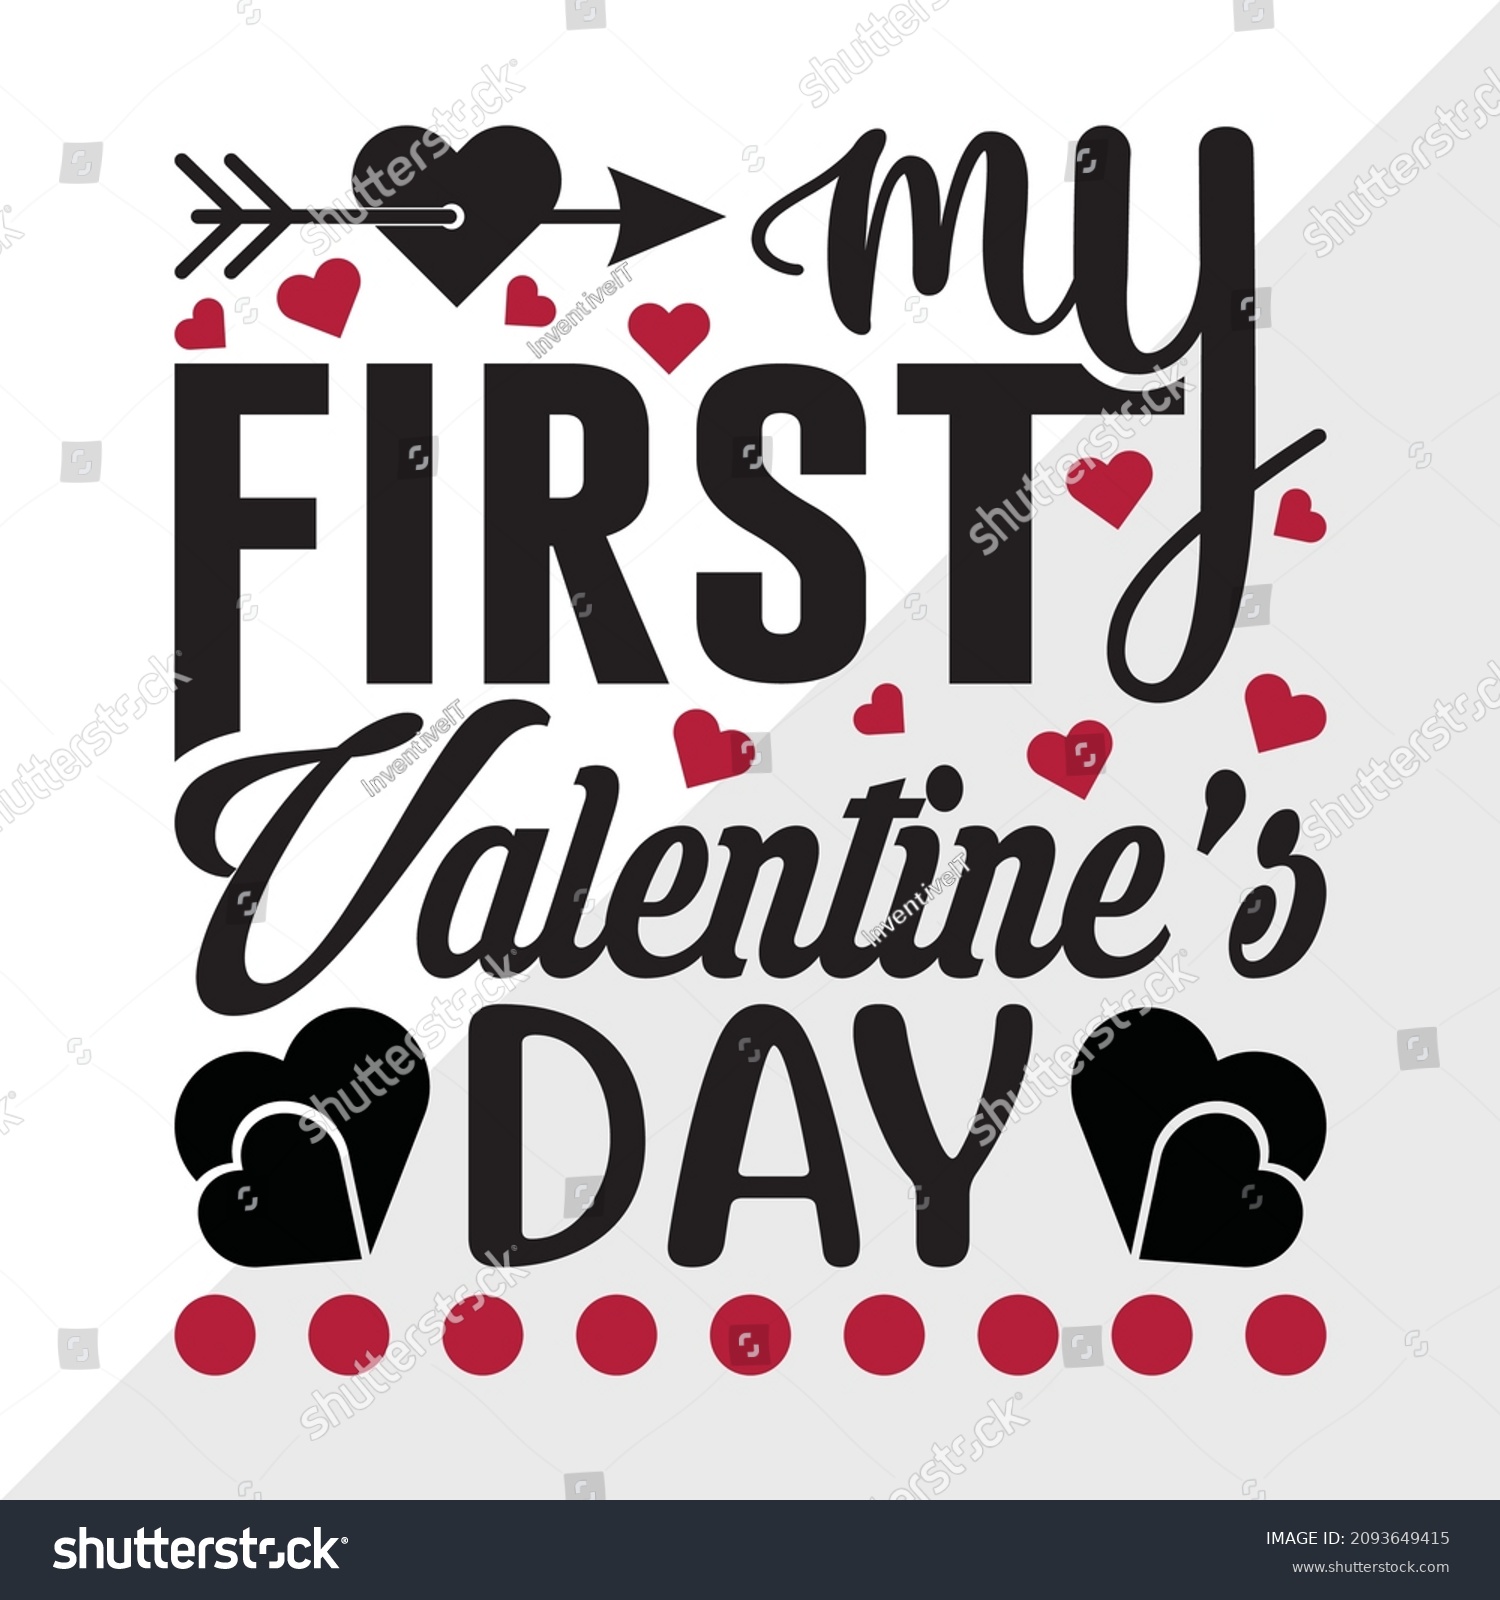 my-first-valentines-day-printable-vector-stock-vector-royalty-free